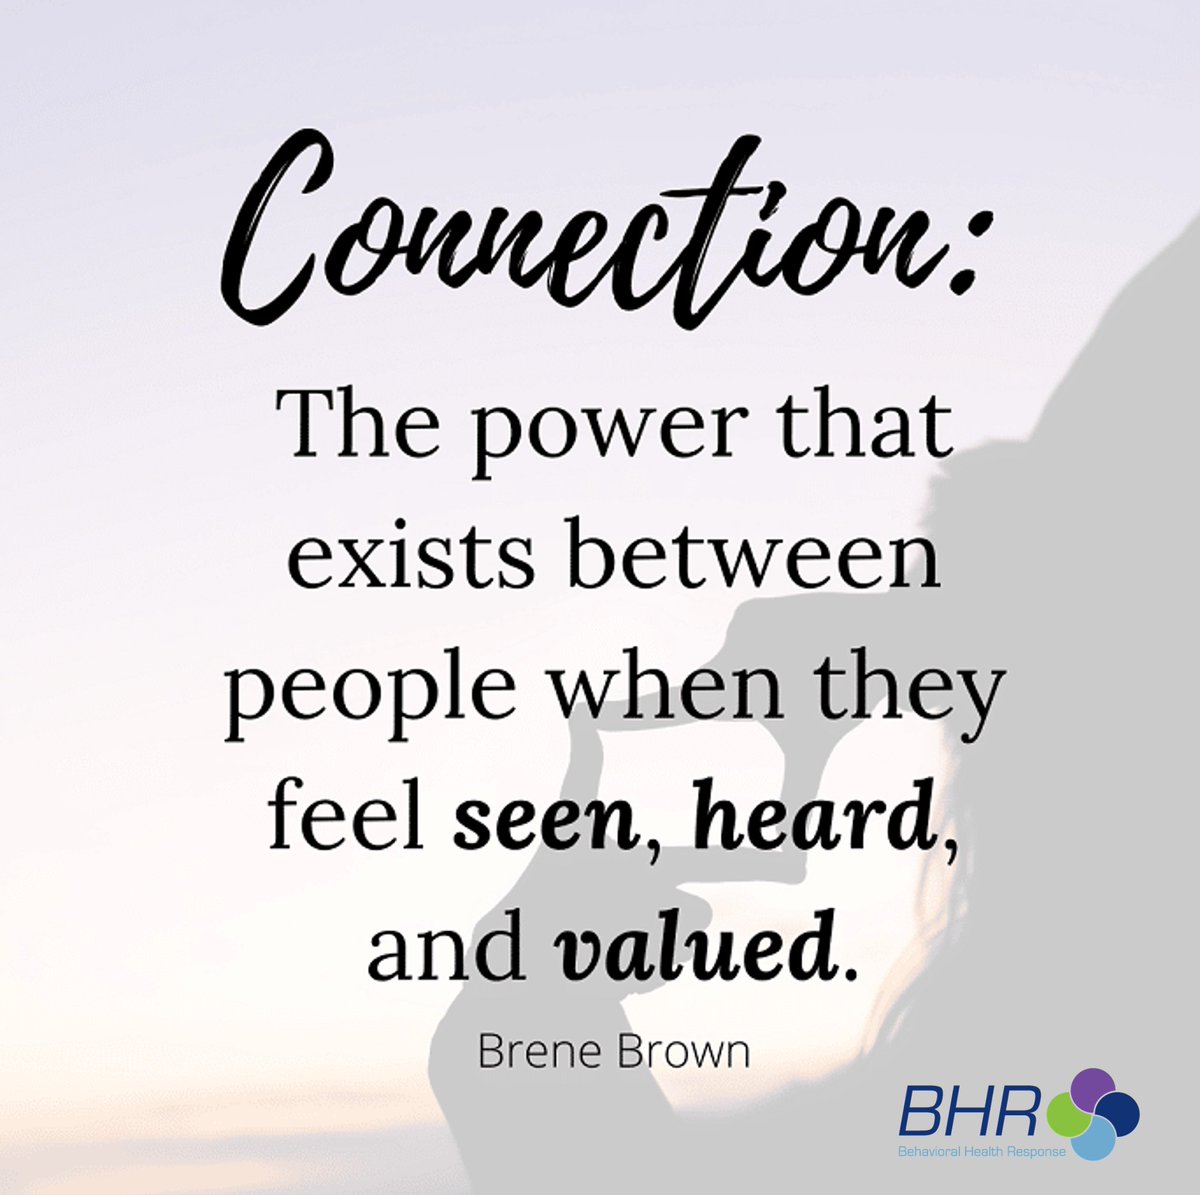 Human connections are vital for our mental/physical wellbeing bc they fulfill an innate need to belong. Building relationships & allowing yourself to be vulnerable reduces your risk for mental illness. Engage in deep conversations to build connection. You'll be happier for it!